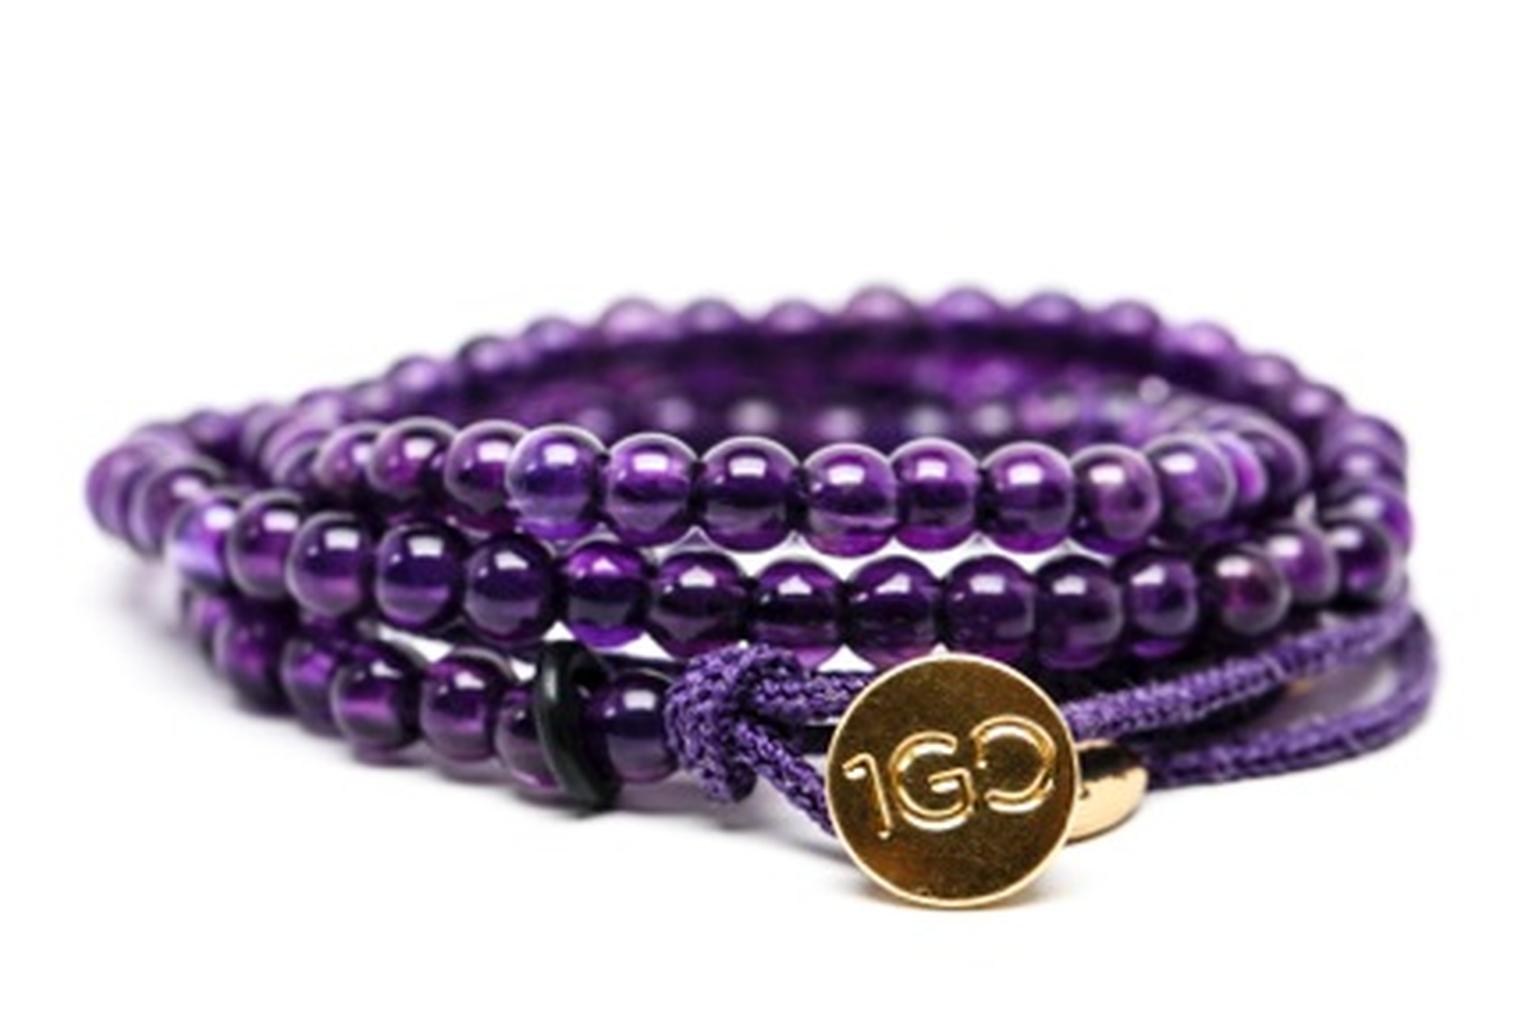 The Gemfields 100 Good Deeds bracelet is now available for purchase at www.100gooddeeds.org/gemfields.